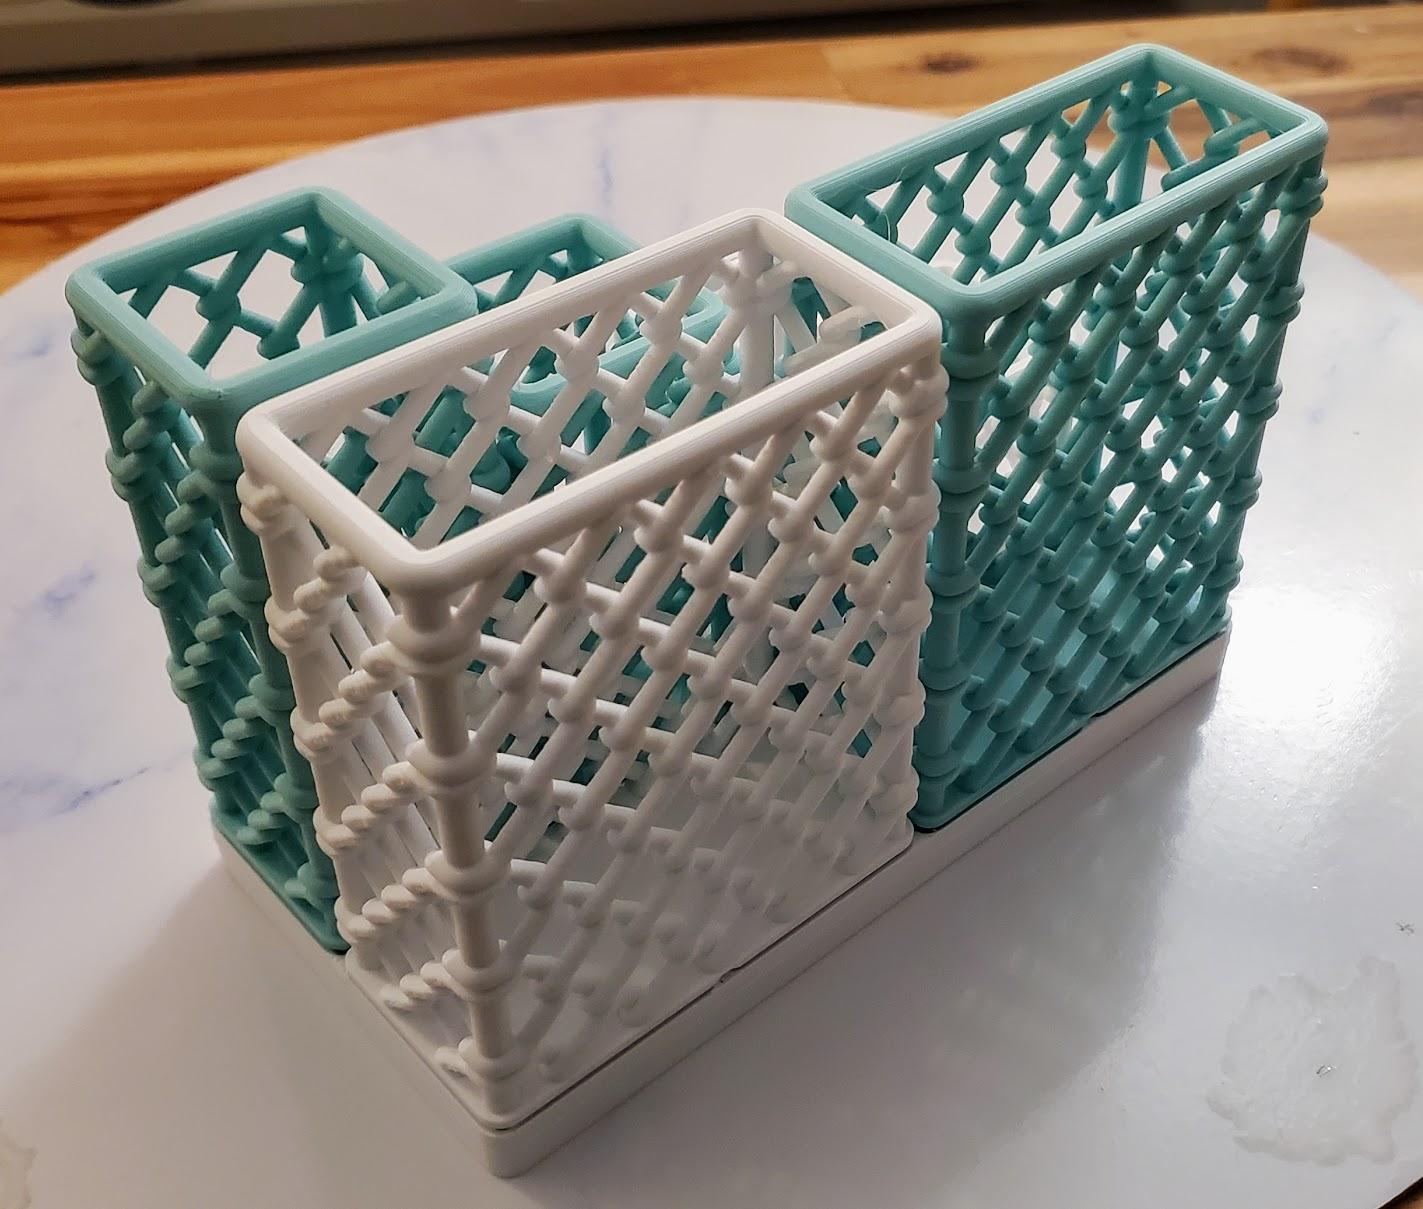 Chain Link Gridfinity Bin 1x2 100mm - Printed in 3DFillies PLA+, love this design so much! - 3d model